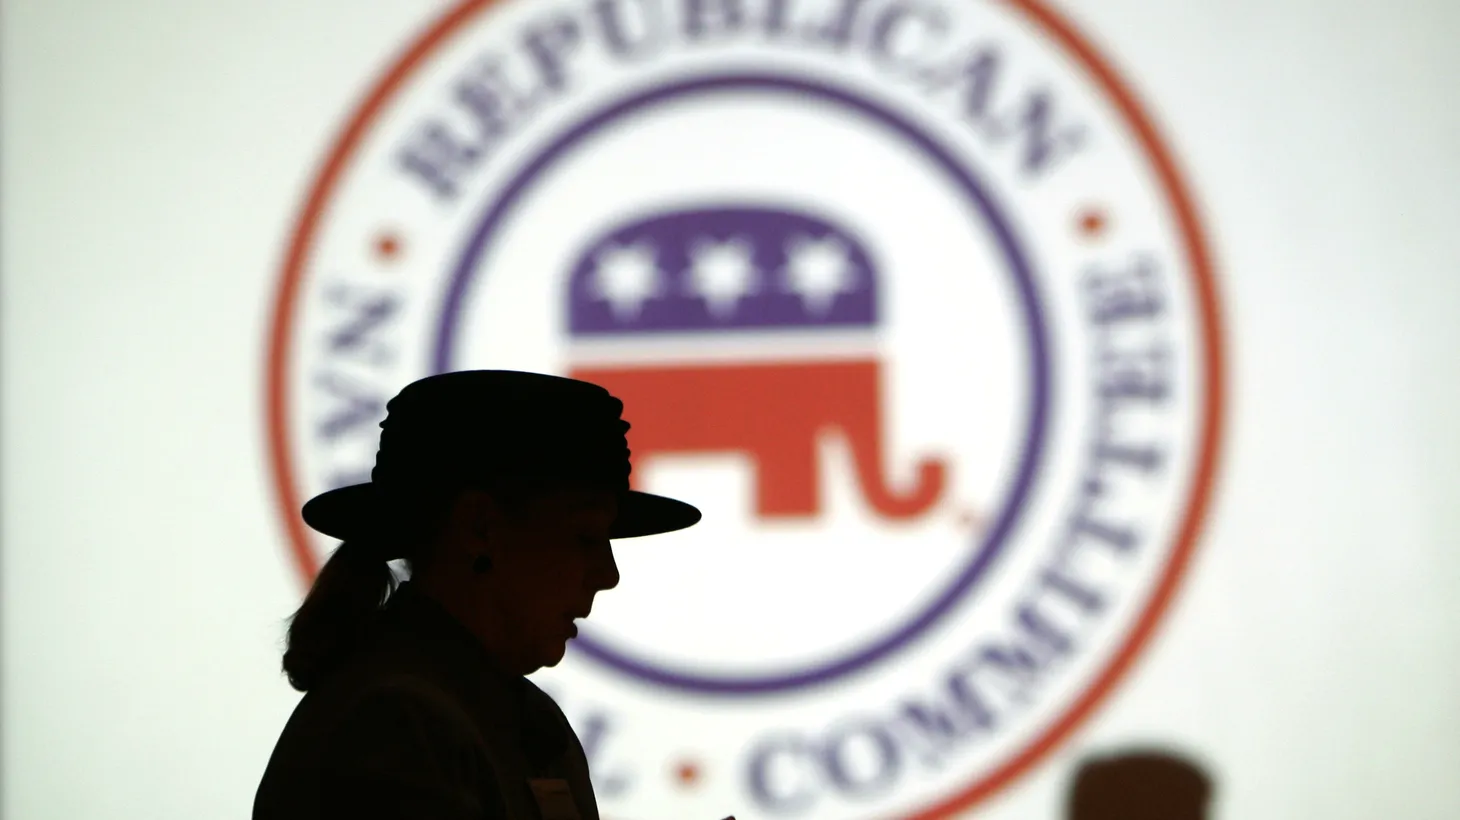 Republican Party members are silhouetted against the Republican National Committee (RNC) logo.